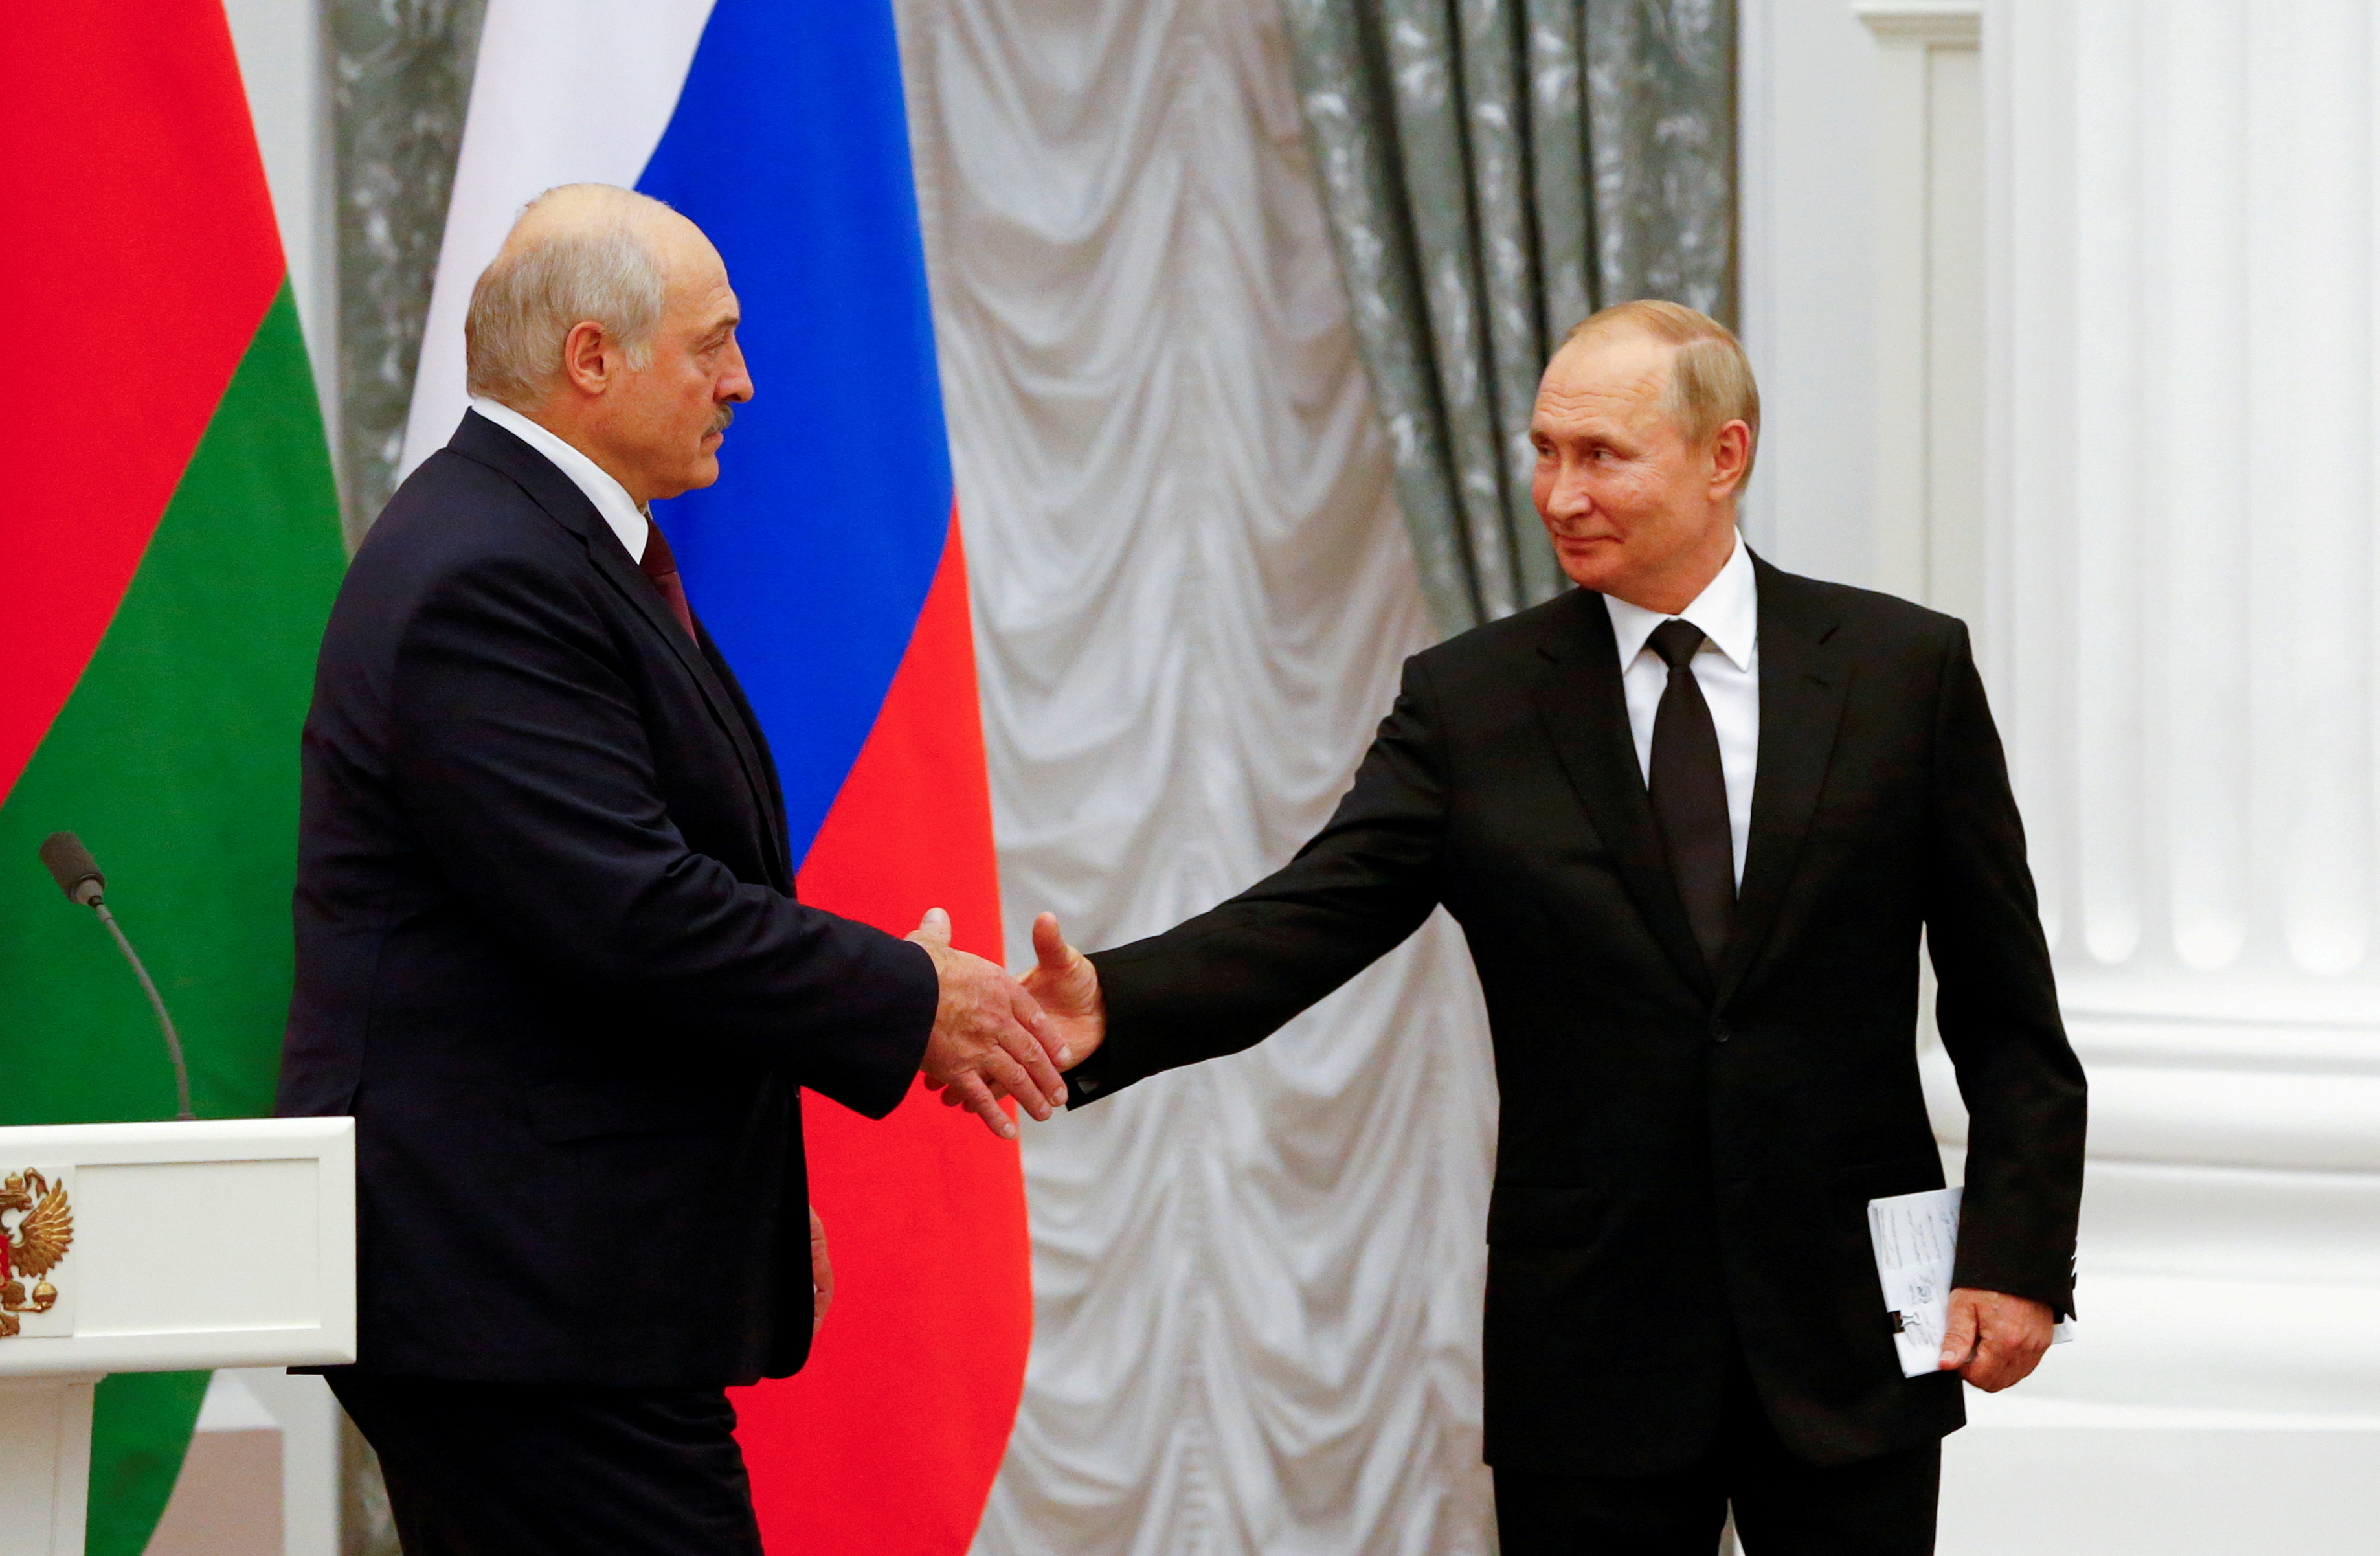 Russian President Putin and Belarusian President Lukashenko attend a news conference in Moscow